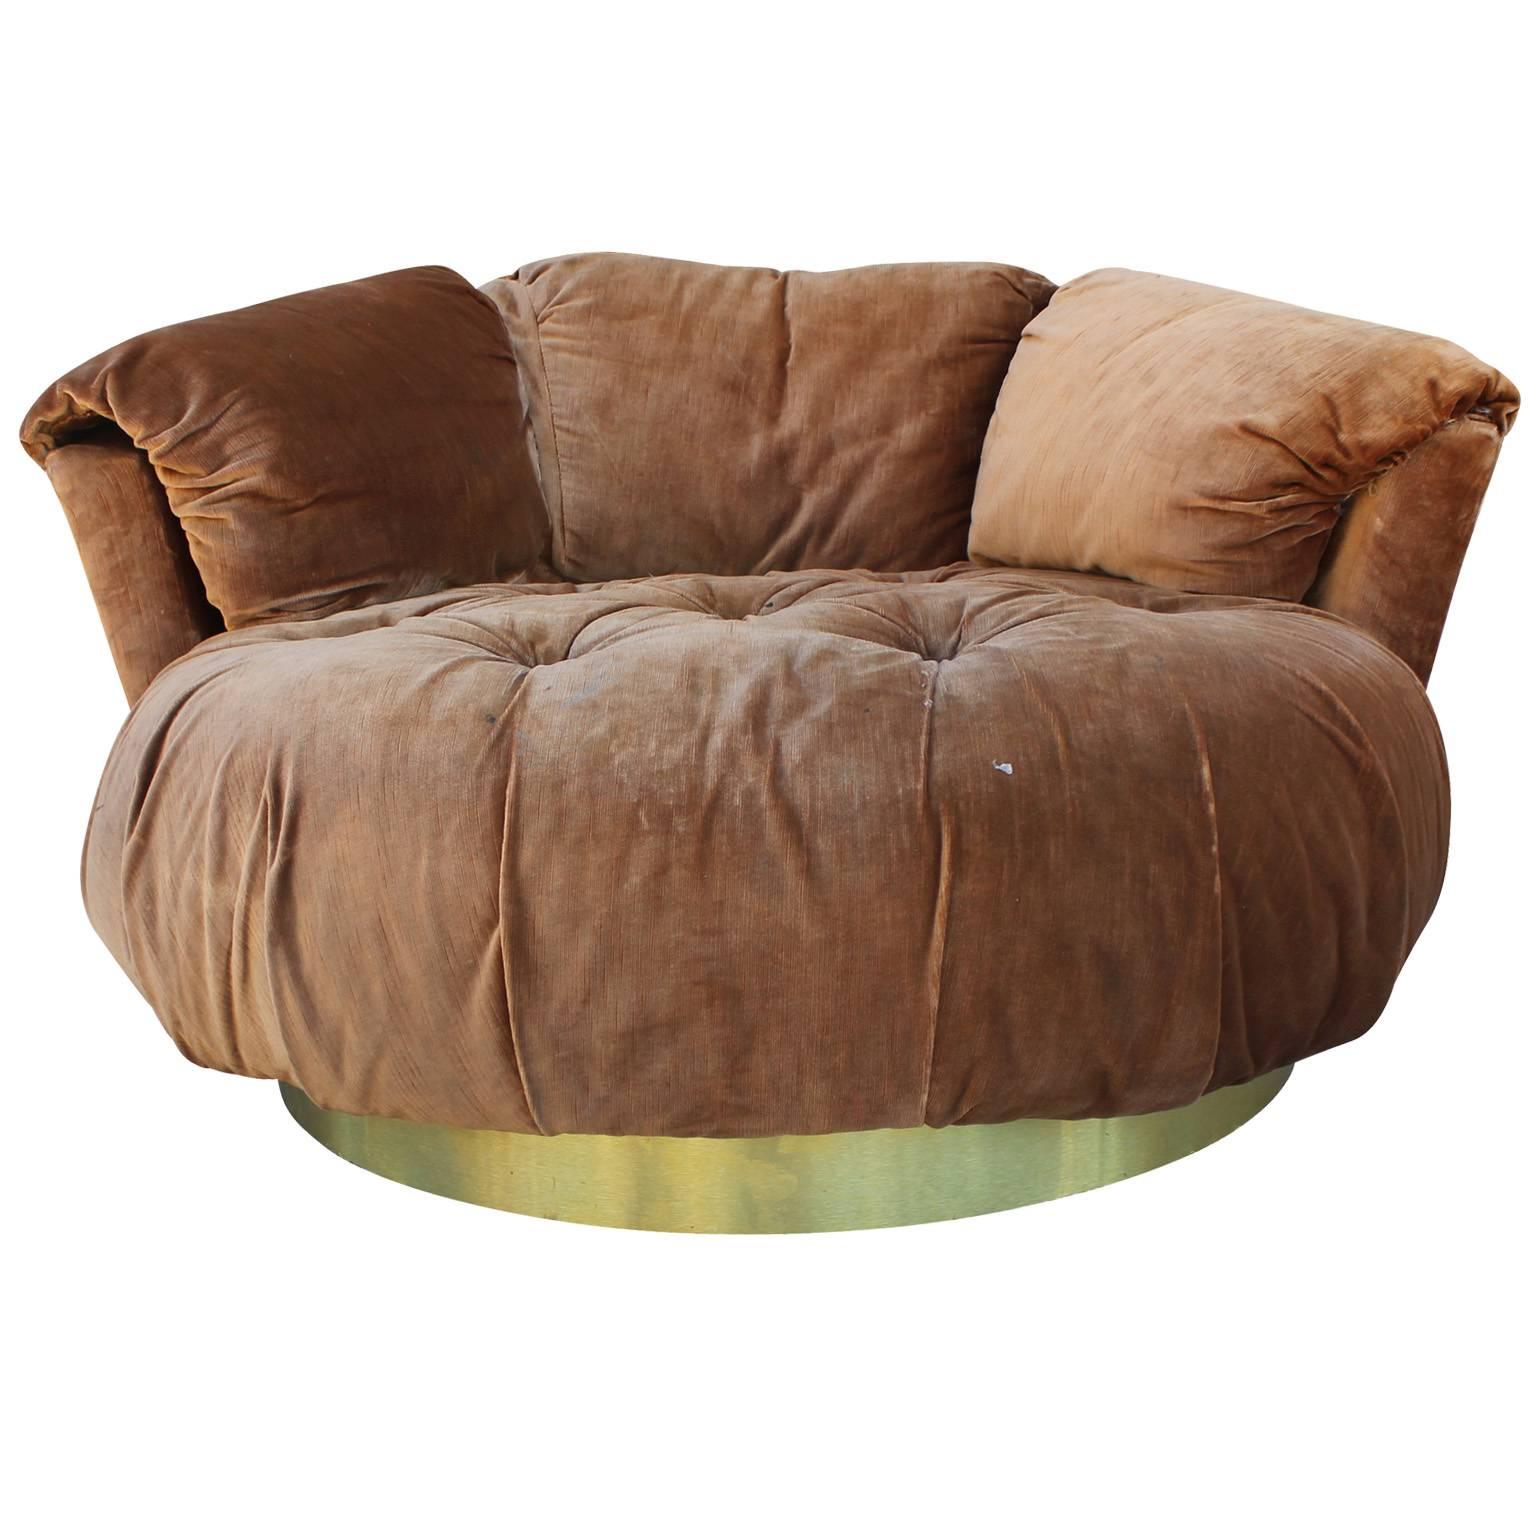 Ultra plush circle Milo Baughman style lounge chair. Attached cushions. Seat is deeply tufted. Chair is upholstered in original brown velvet which needs to be replaced. Chair rests on a brushed brass base. Base shows little signs of wear.